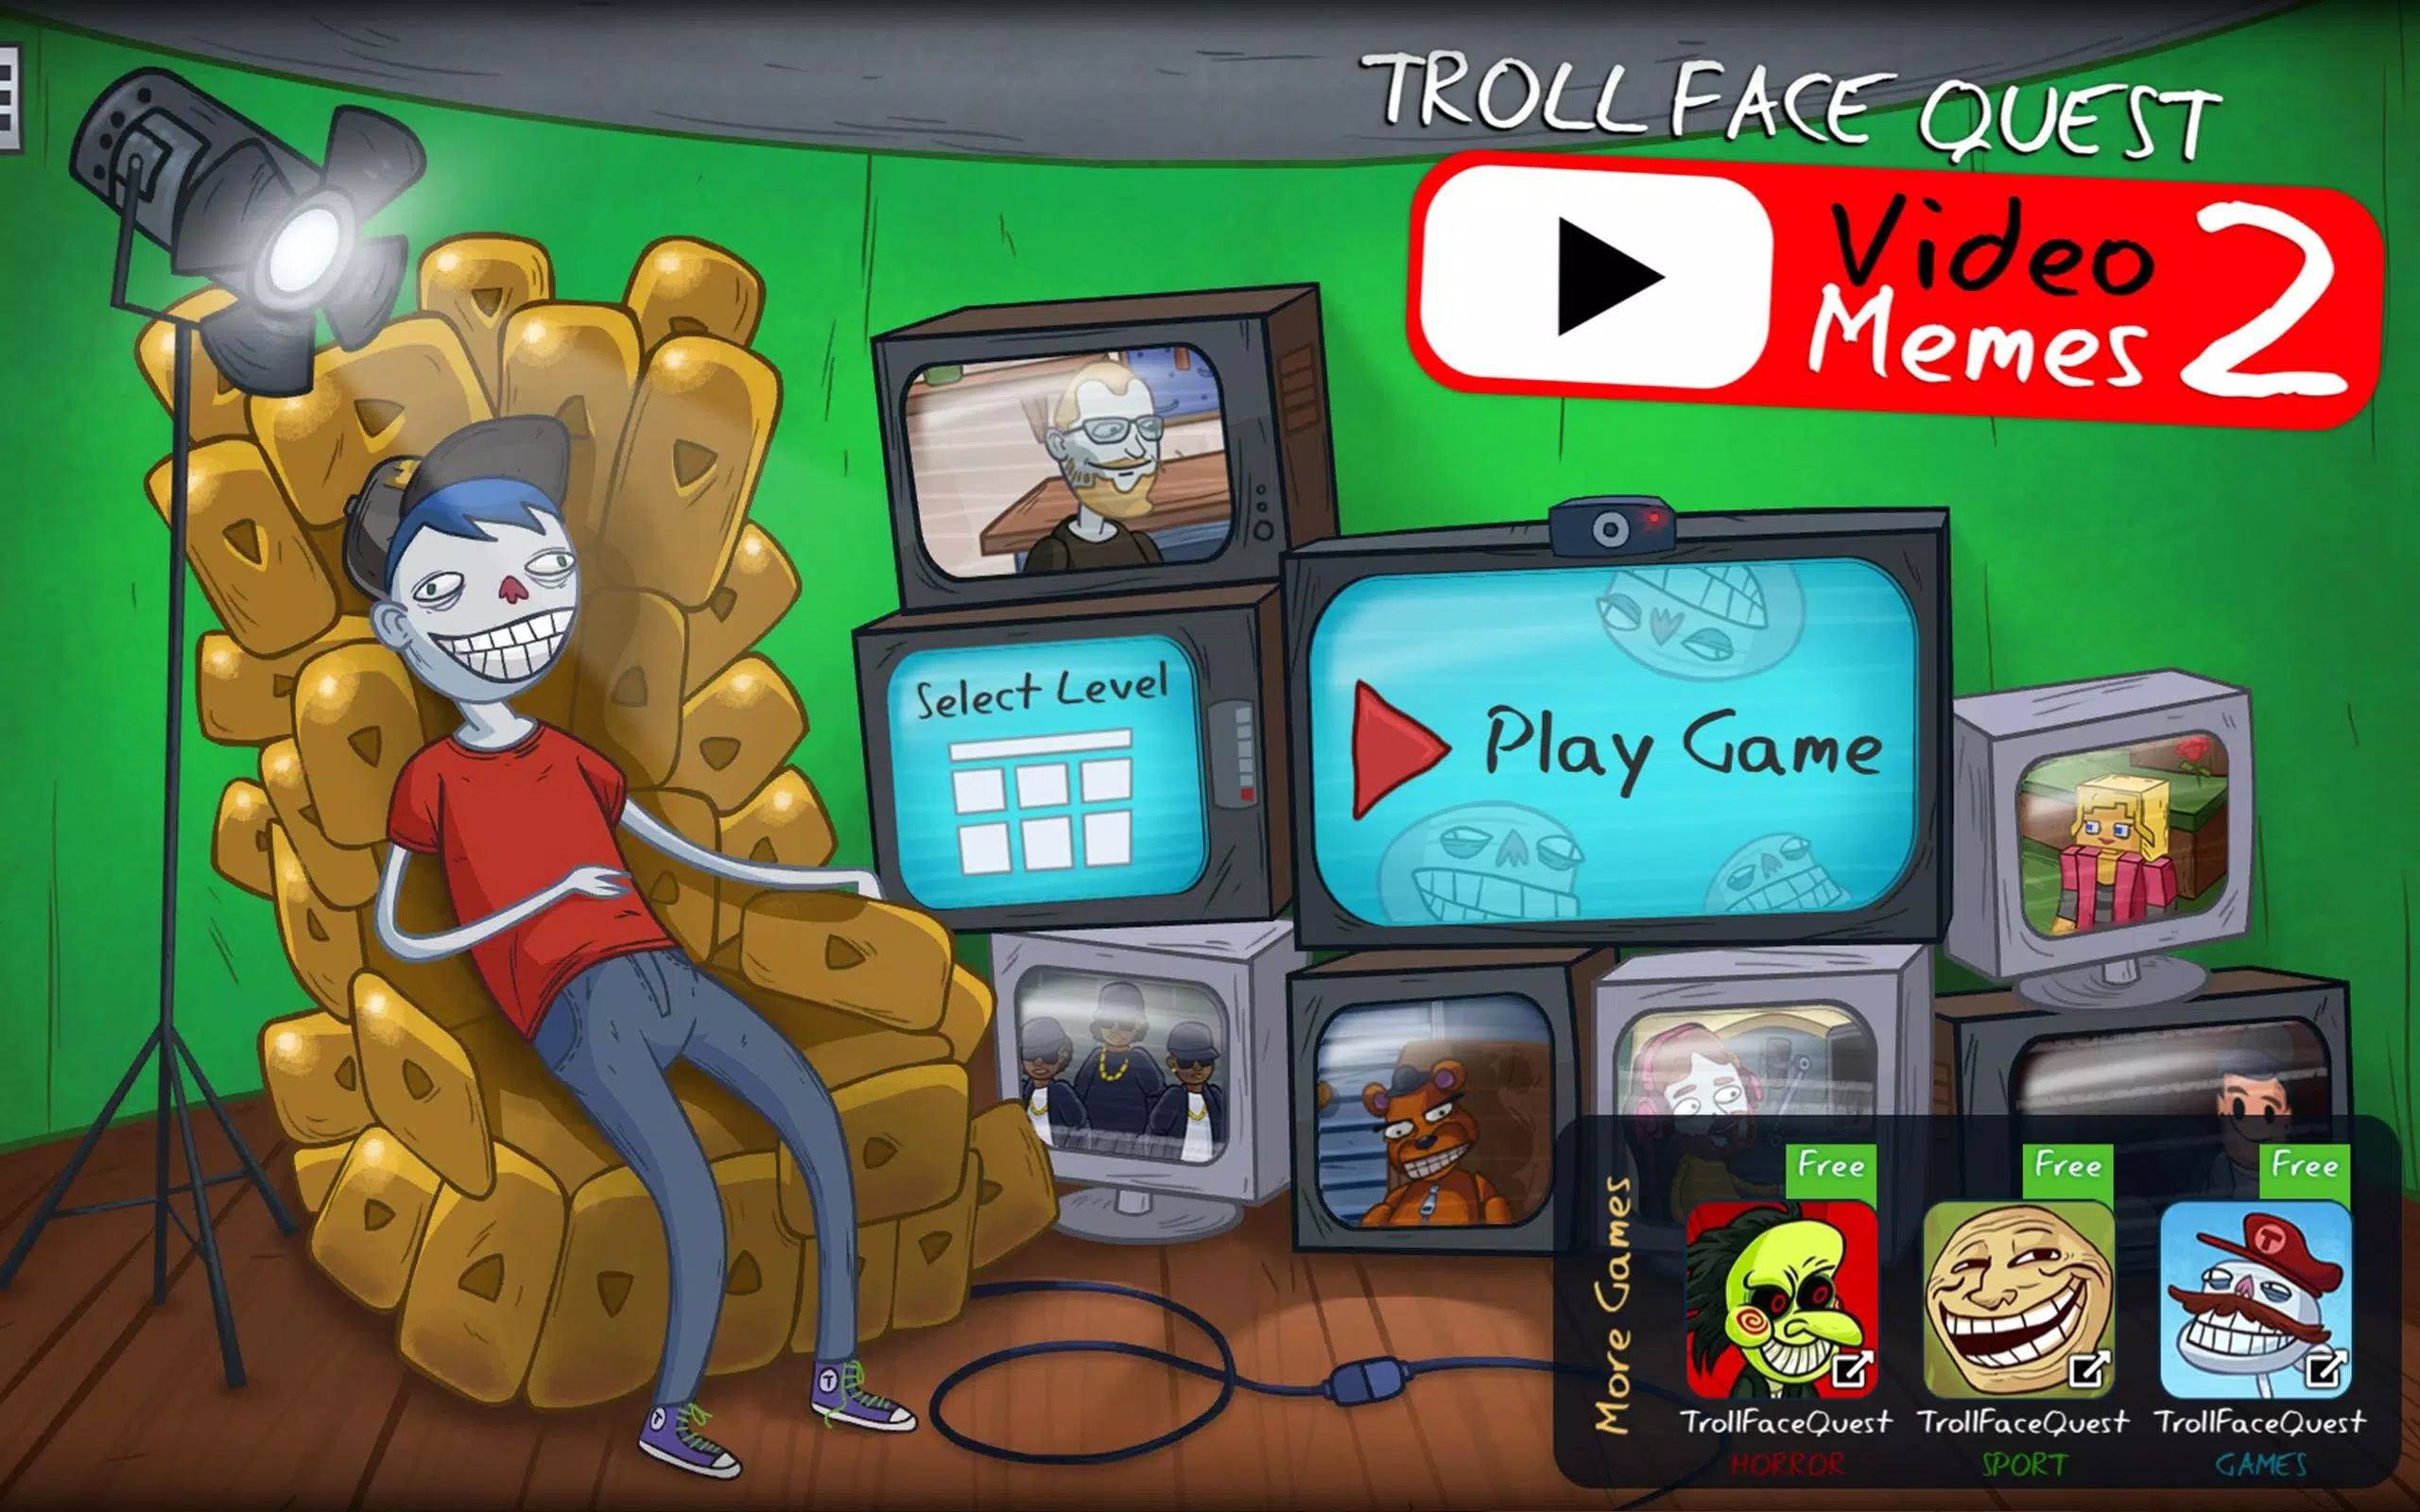 Troll Face Quest Video Memes 2 APK for Android Download